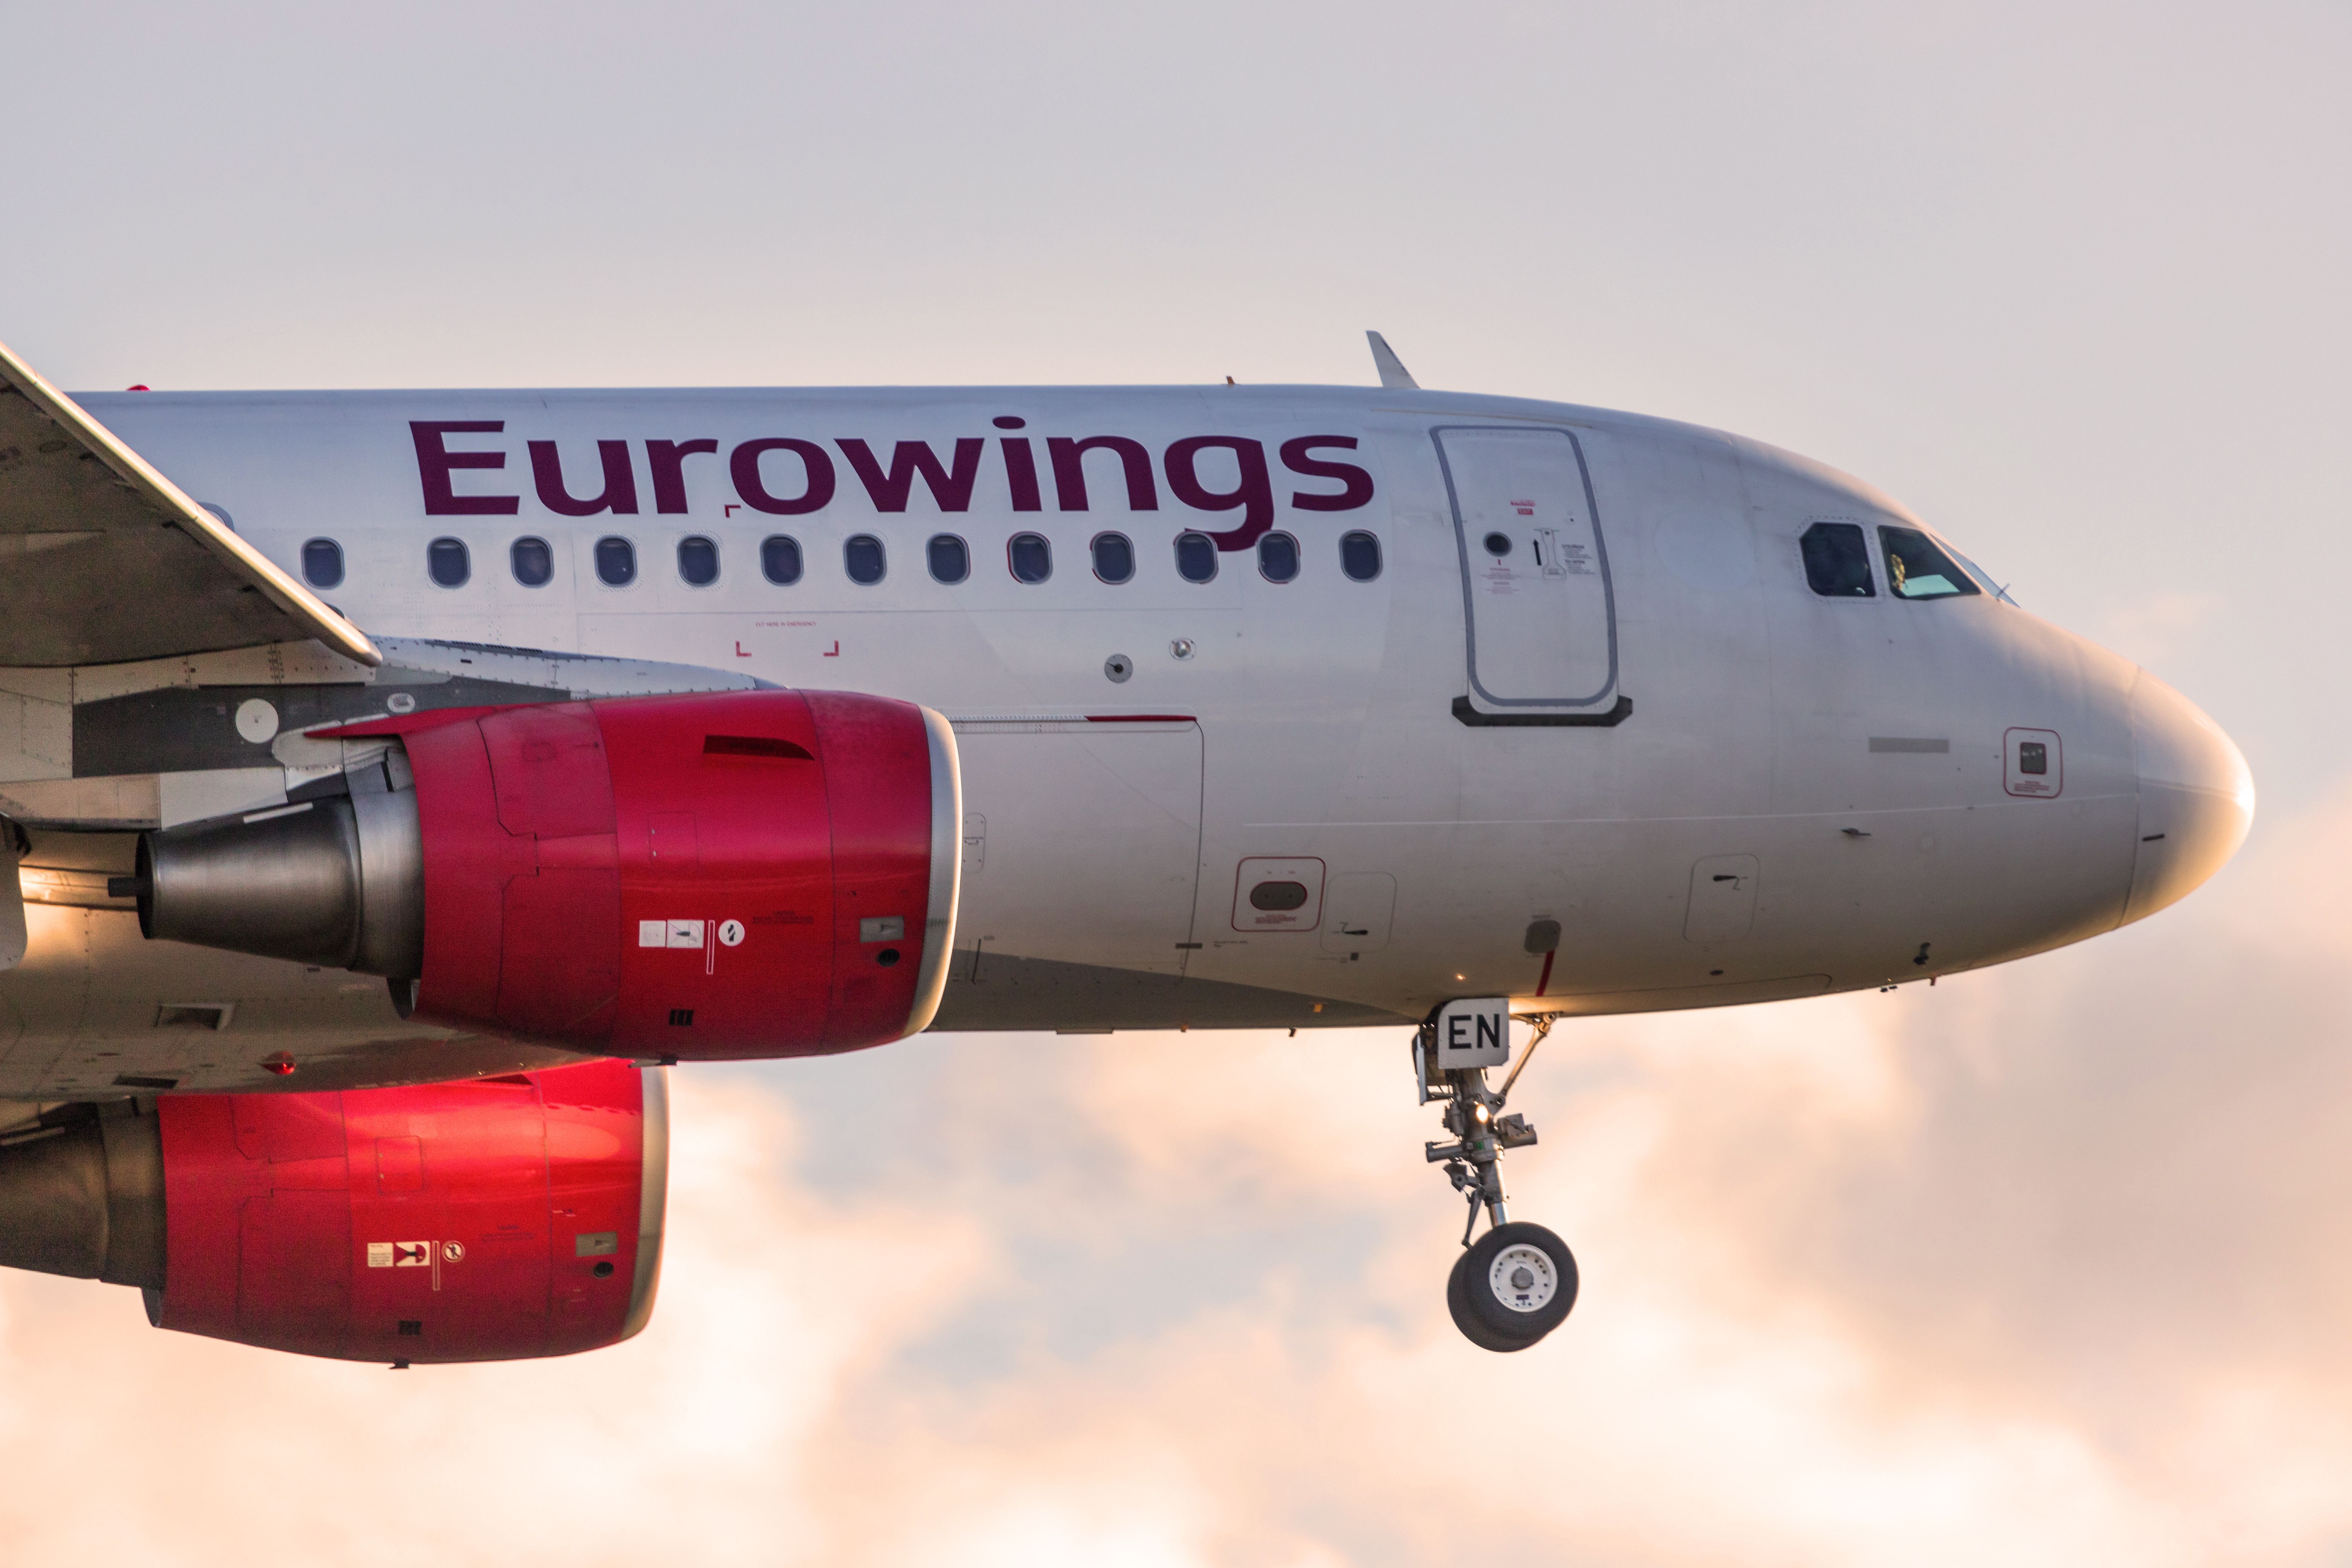 A Eurowings aircraft flying in the sky.